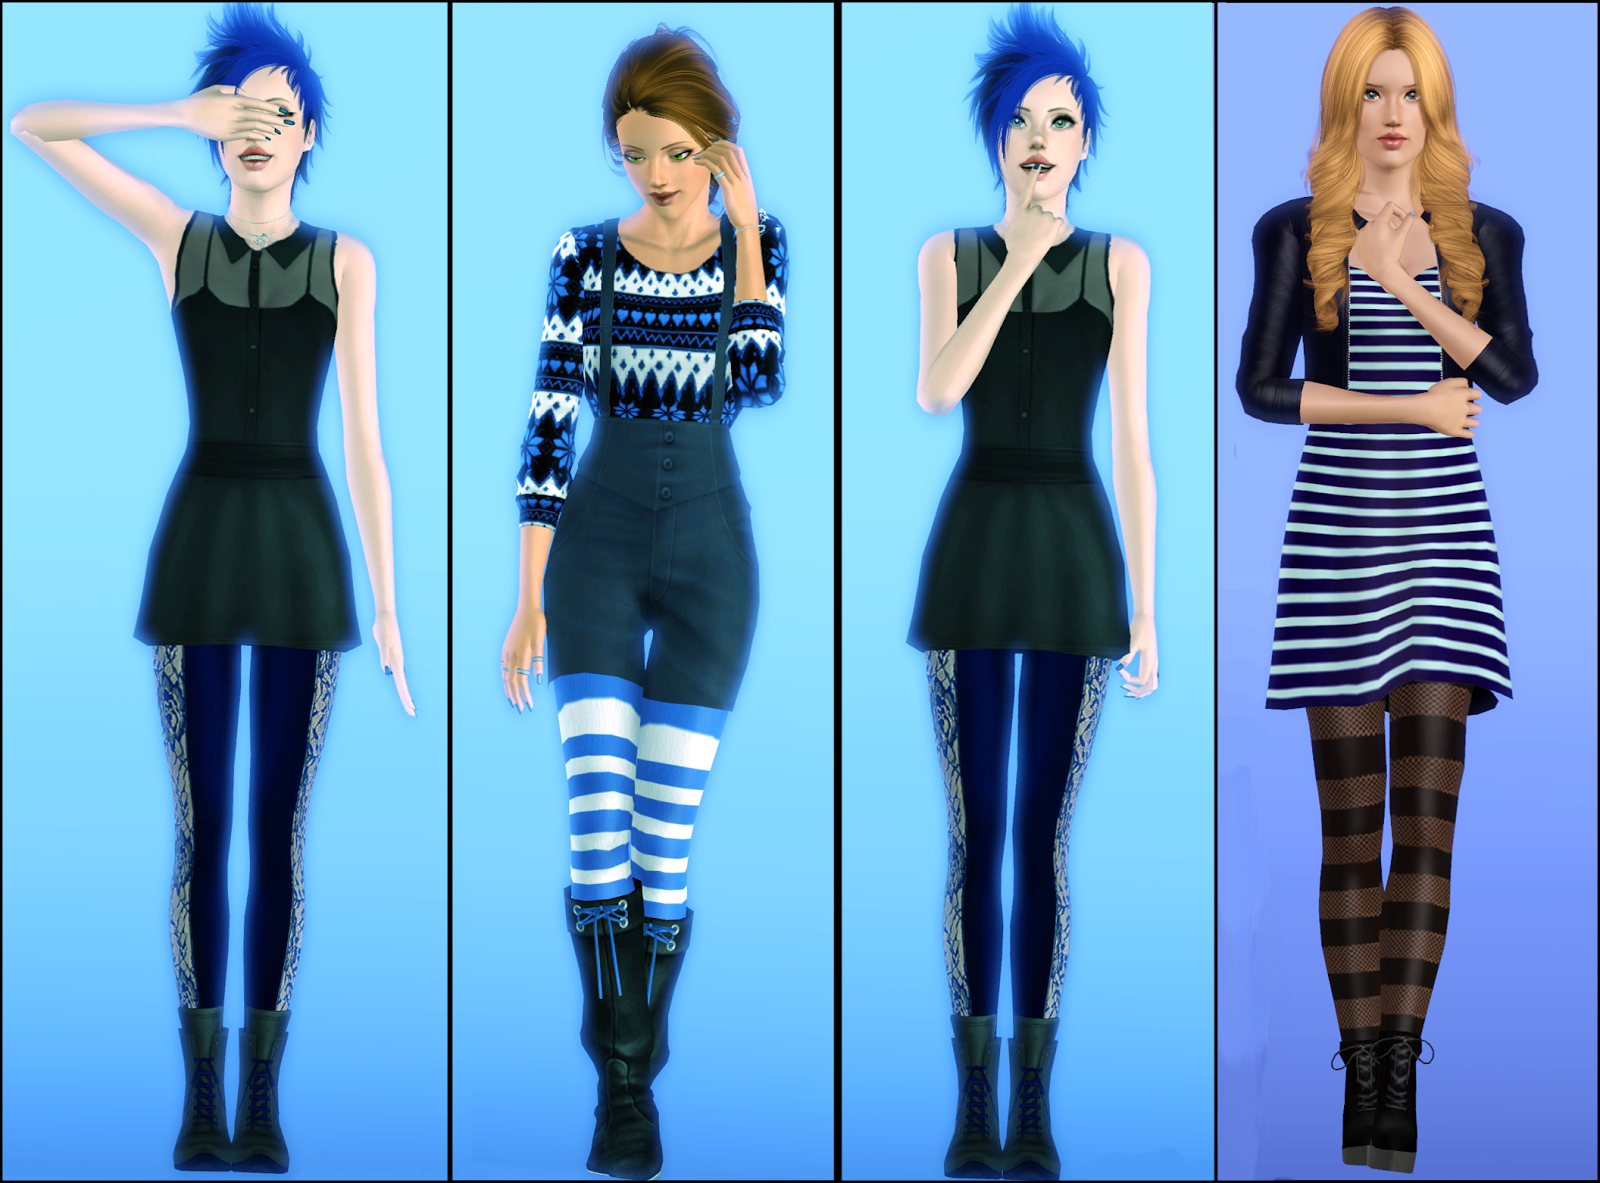 My Sims 3 Poses Rihanna Pose Pack Fixed By Rayne